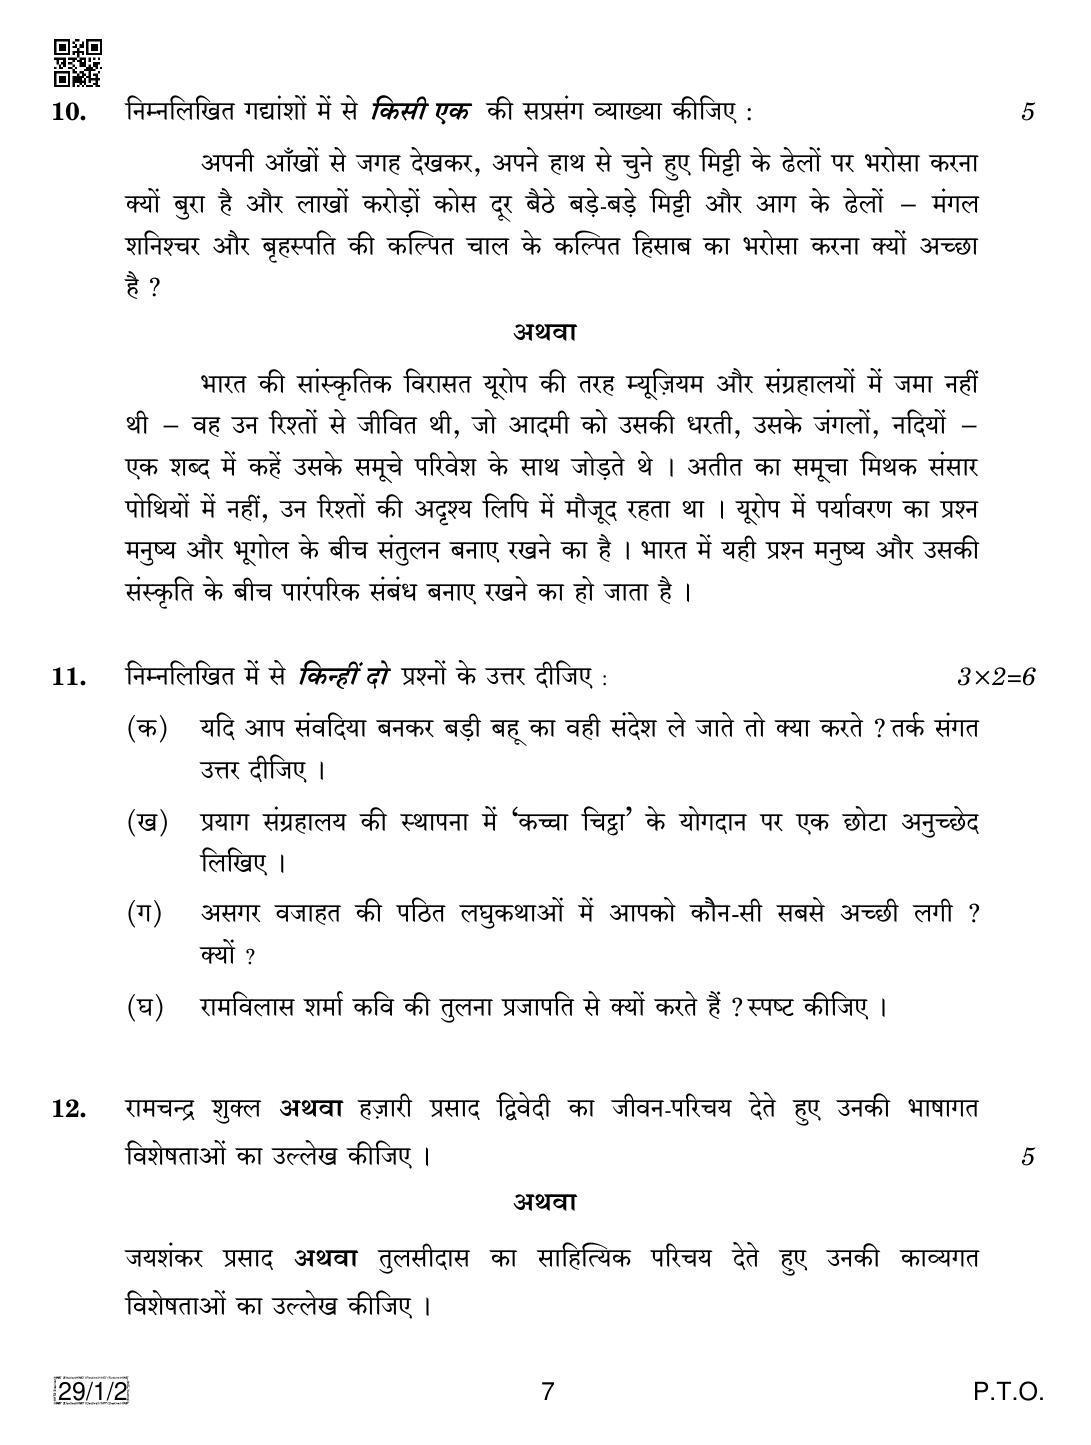 CBSE Class 12 29-1-2 HINDI ELECTIVE 2019 Compartment Question Paper - Page 7